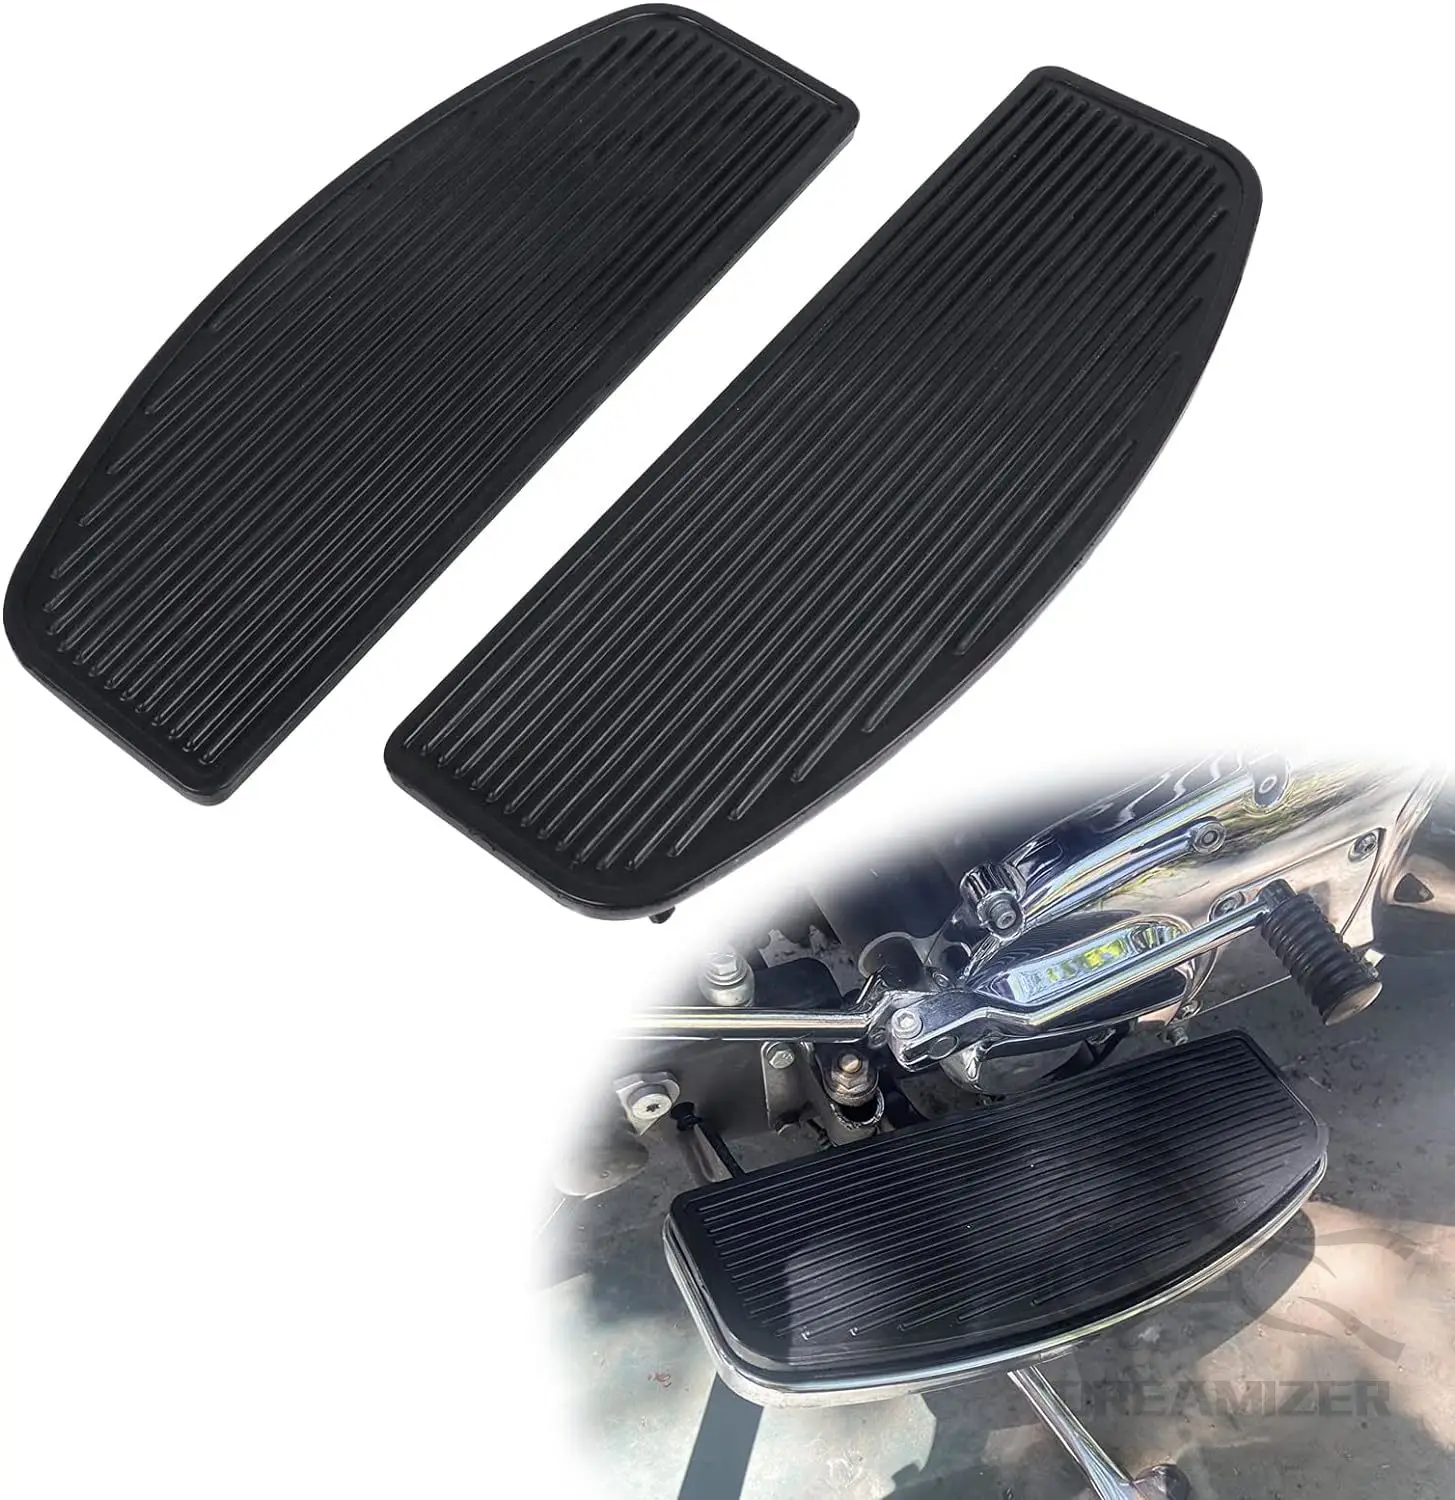 Motorcycle Rubber Rider Pad Front Footrest Foot Peg Rear Passenger Footb... - $73.58